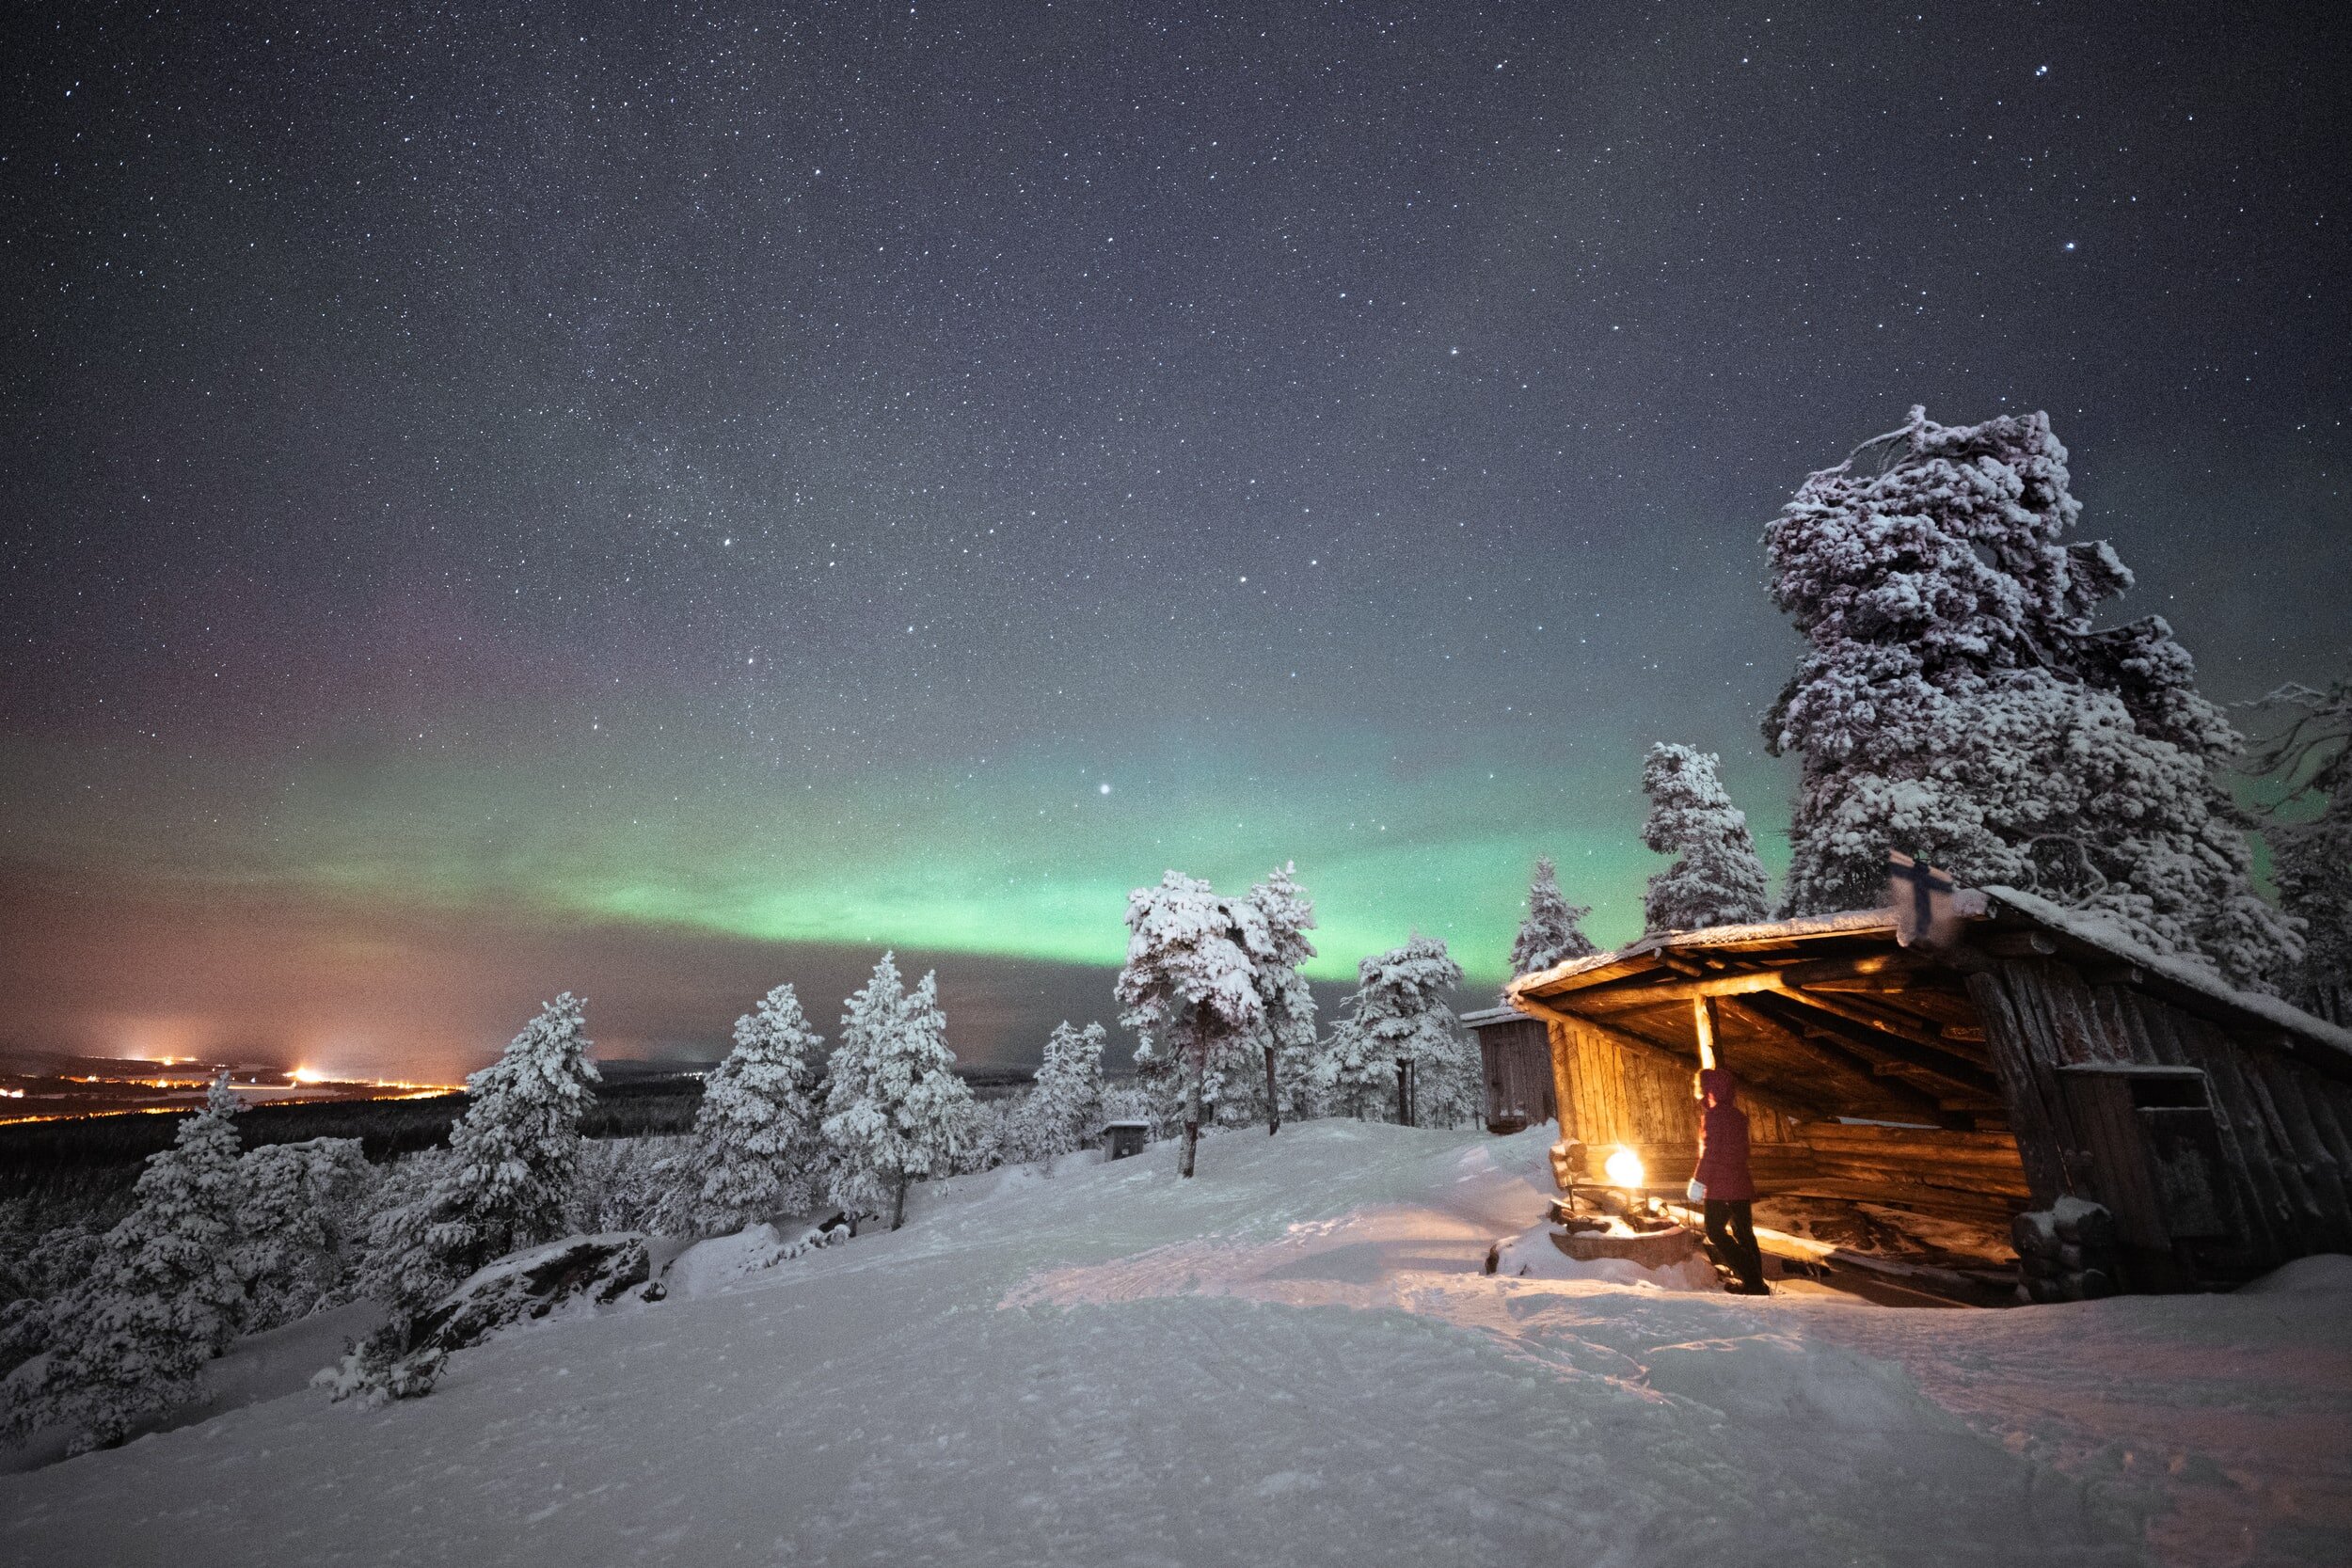 Northern lights over Finland can be enjoyed with an escort service europe